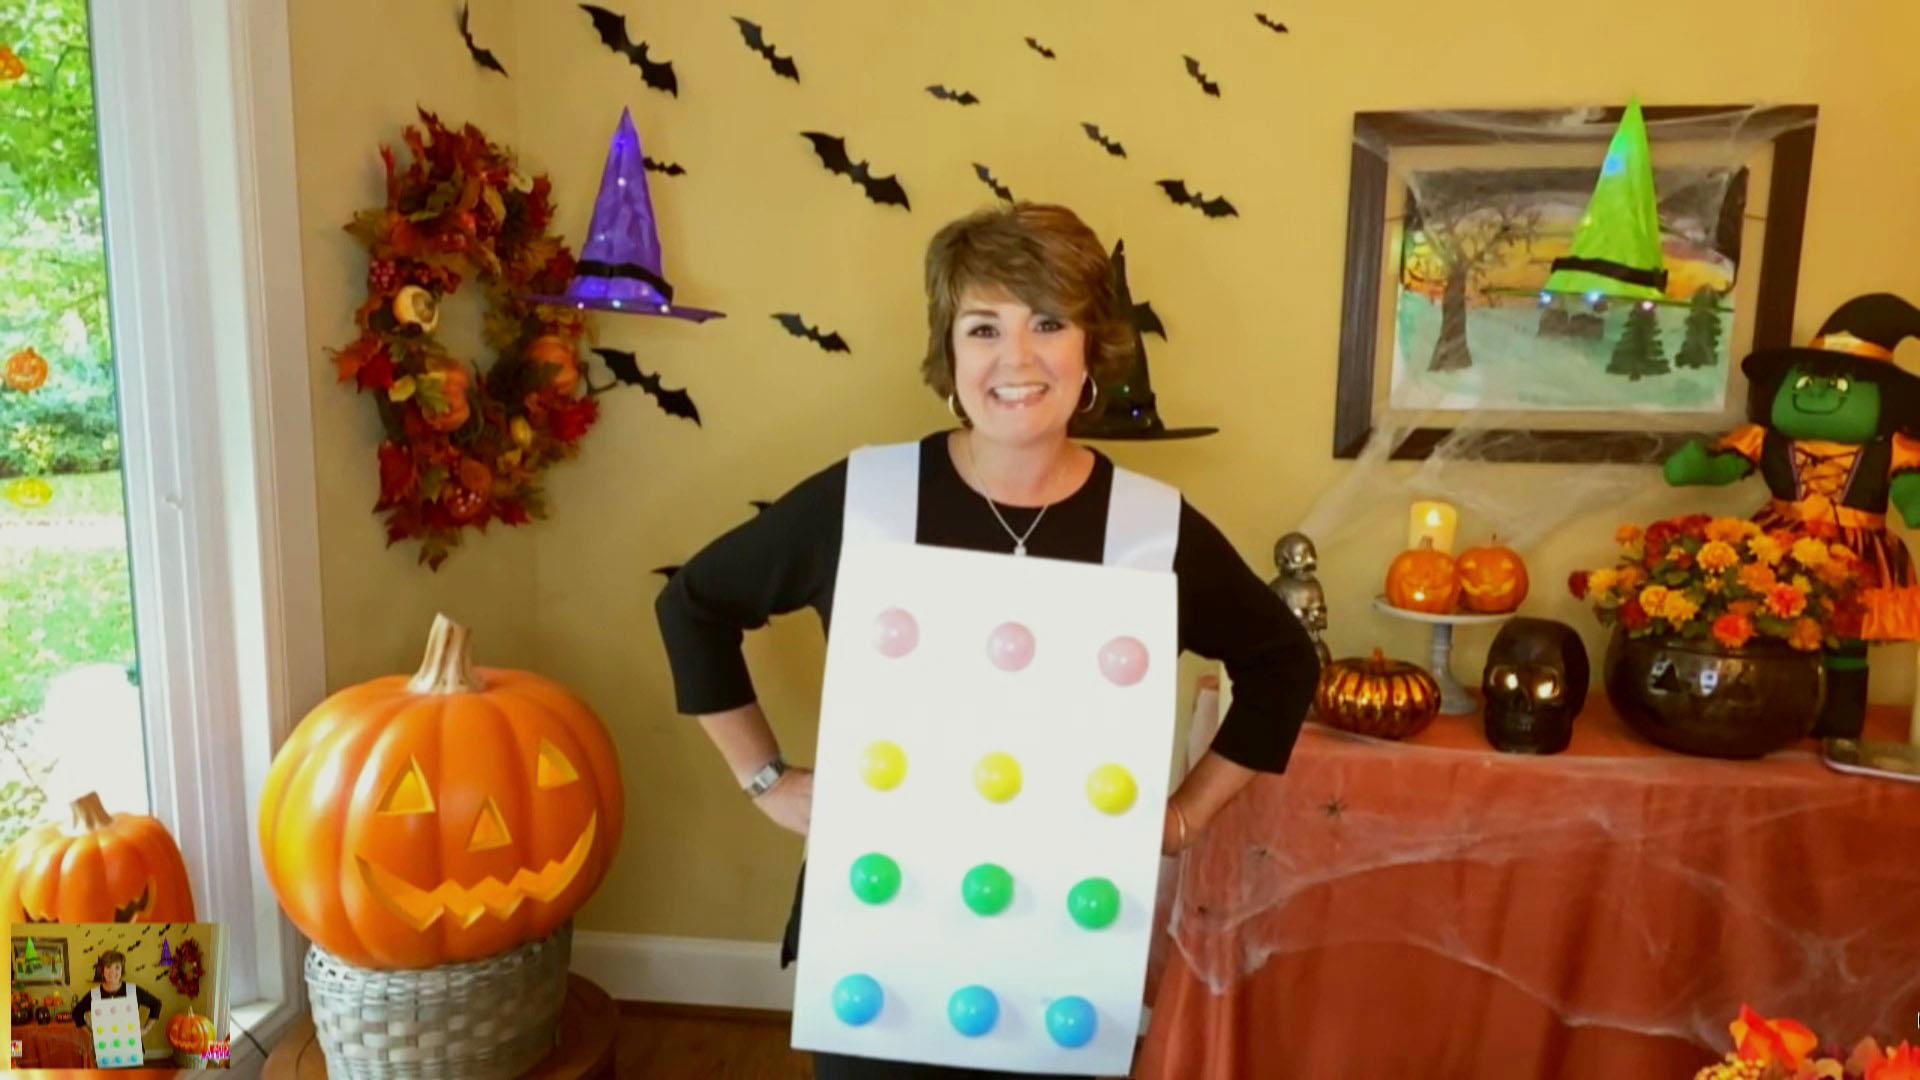 Watch TODAY Highlight: Last-minute Halloween costumes using everyday items - NBC.com